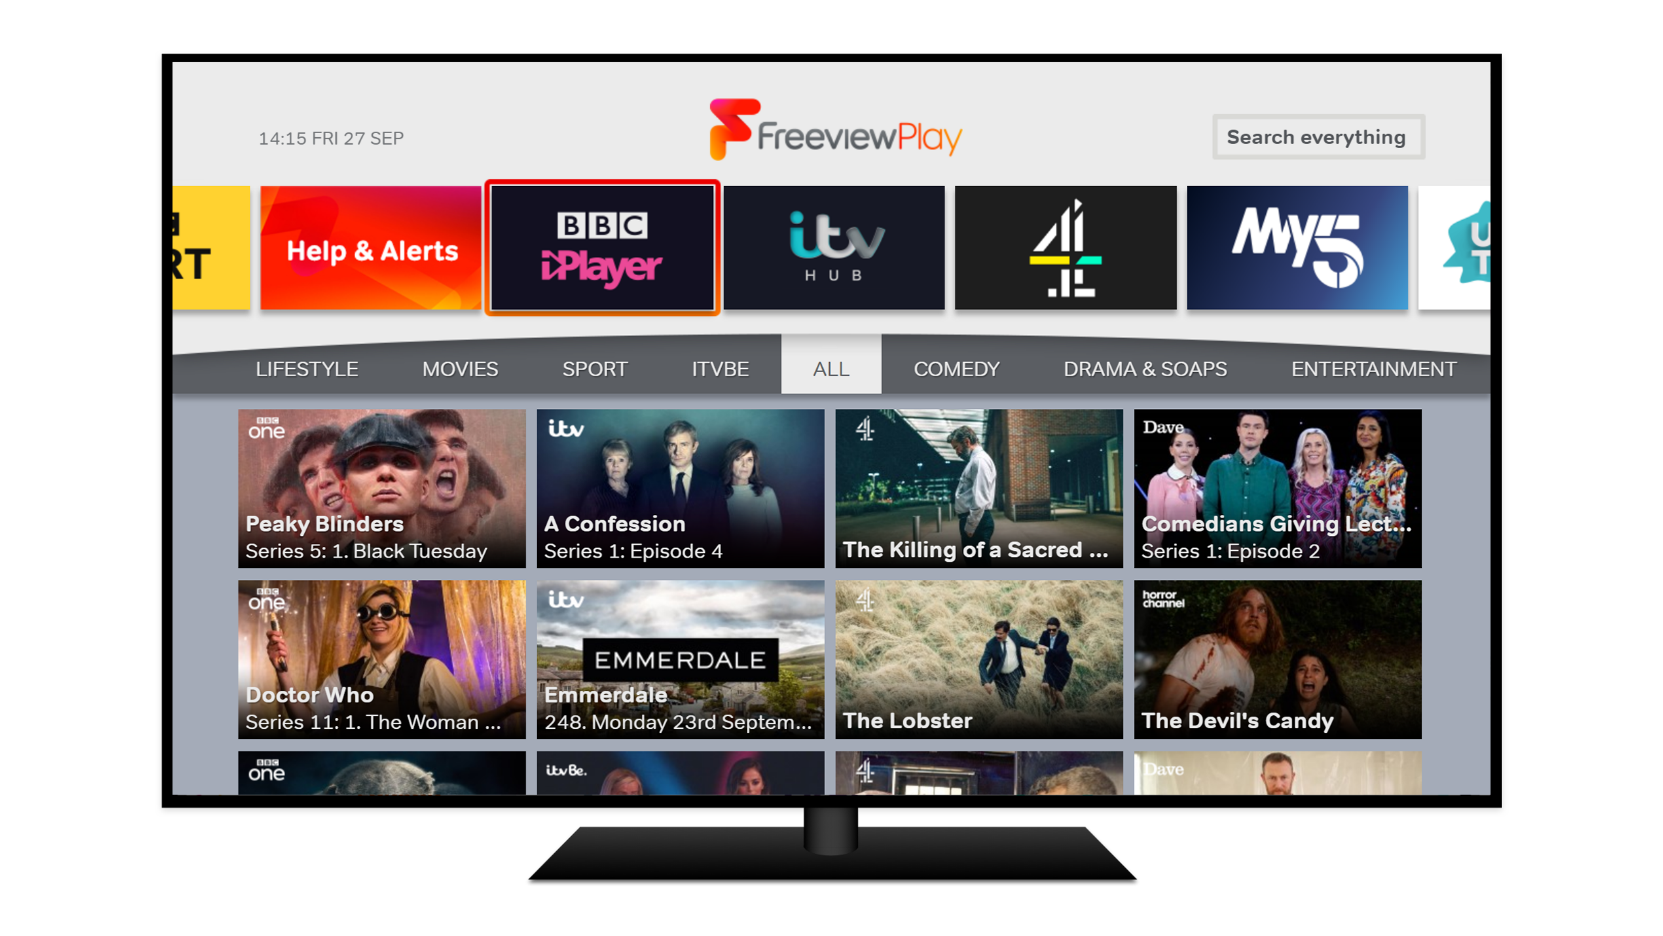 TV showing the Explore Freeview Play interface, which pulls together all the content from BBC iPlayer, ITV Hub, All4, My5, UKTV Play, and the CBS Players in one place